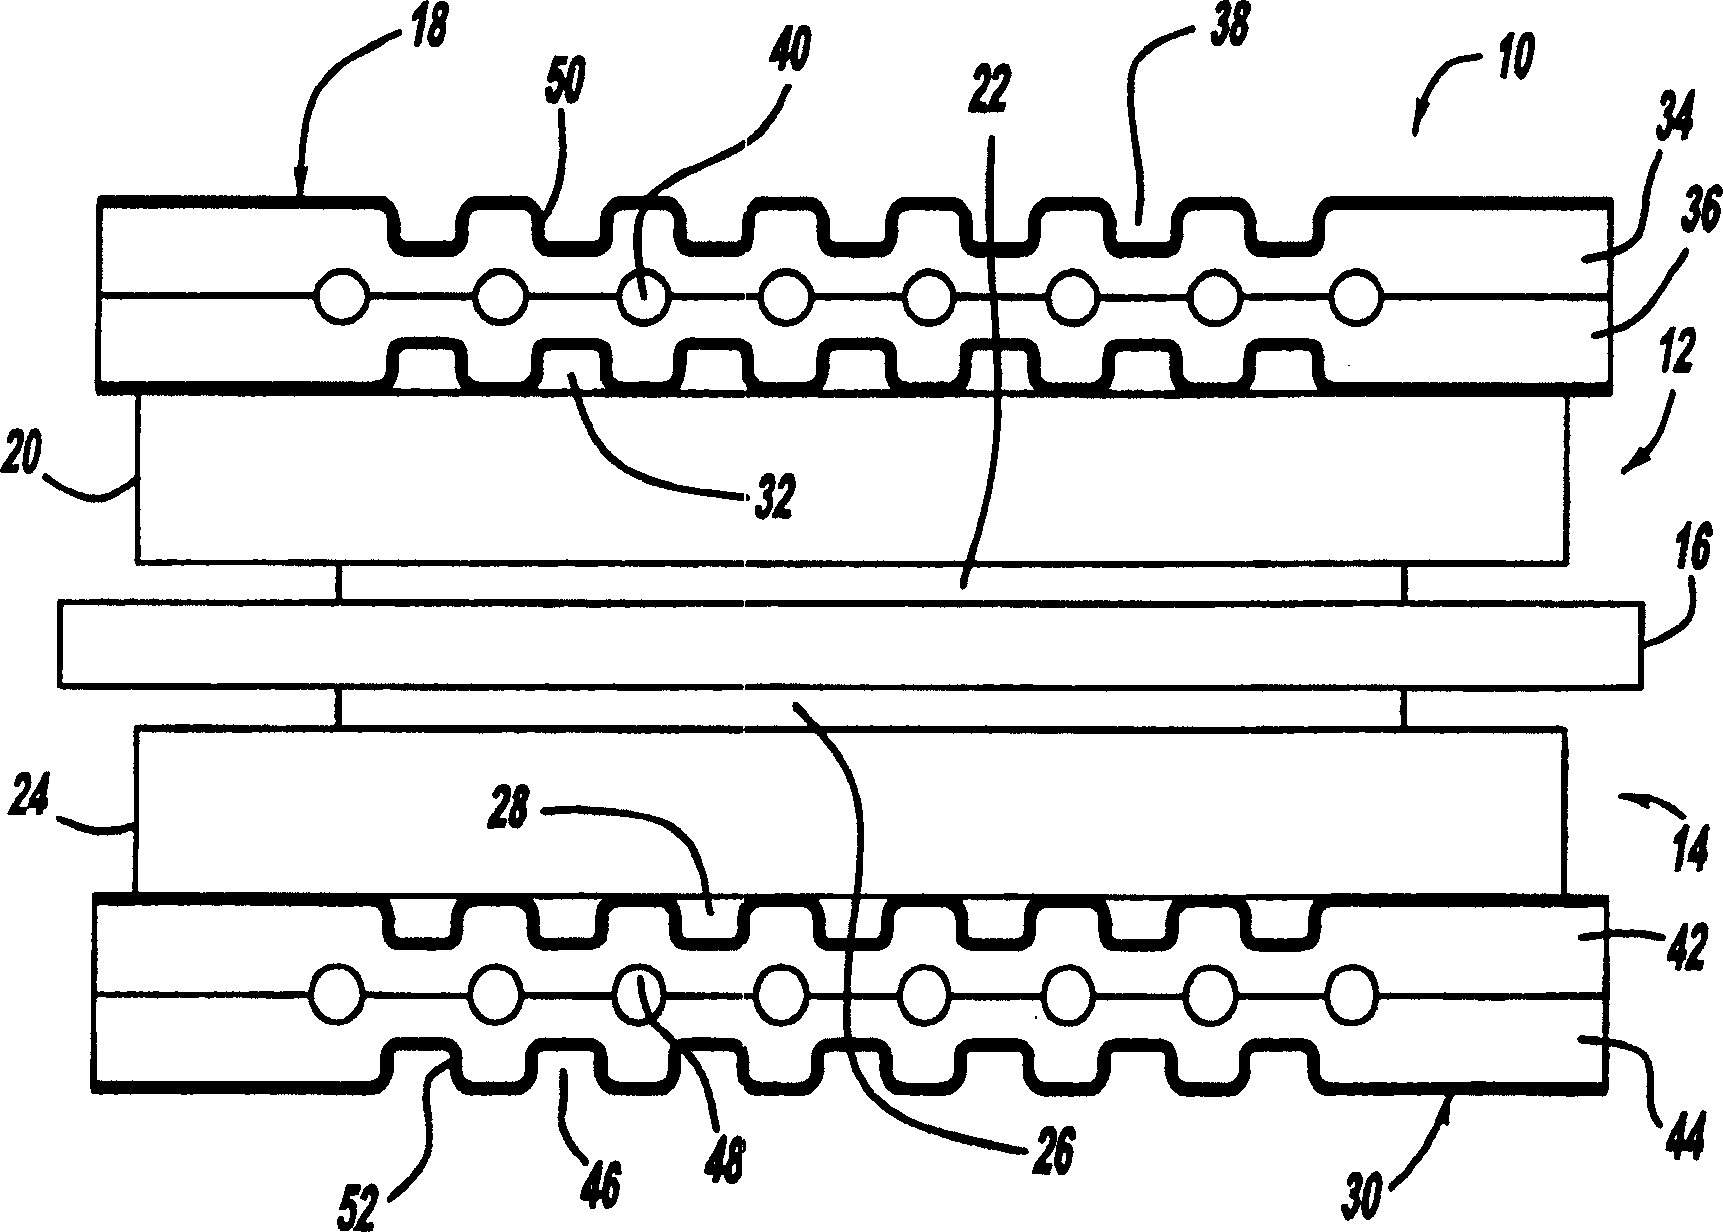 Fuel cell contact element including a tio2 layer and a conductive layer